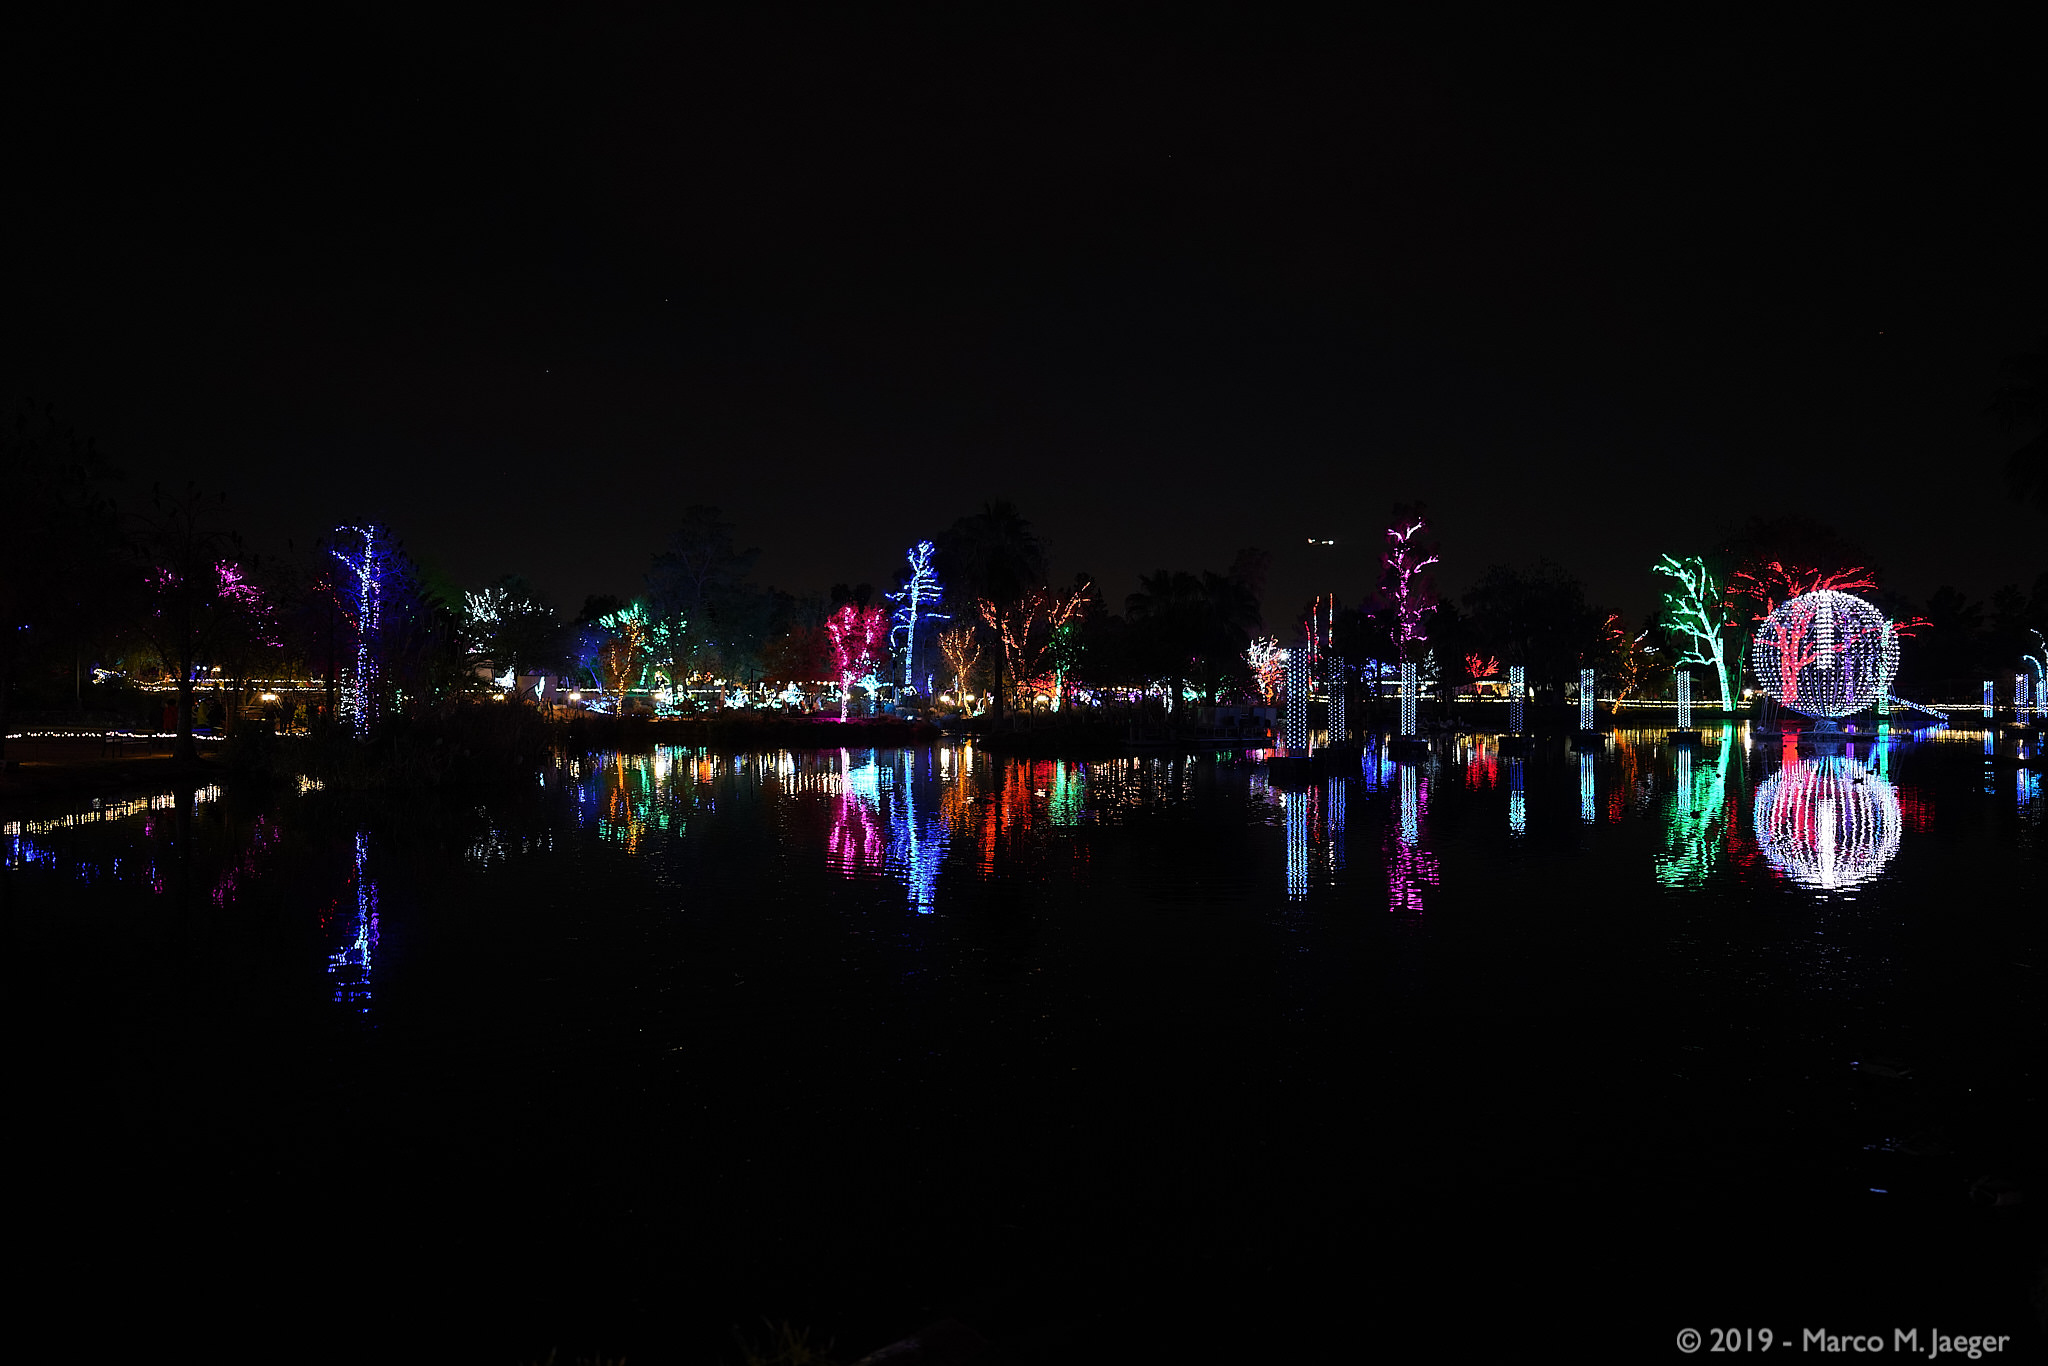 SONY ILCE-7RM3, 1⁄20 sec, f/1.4, ISO 640